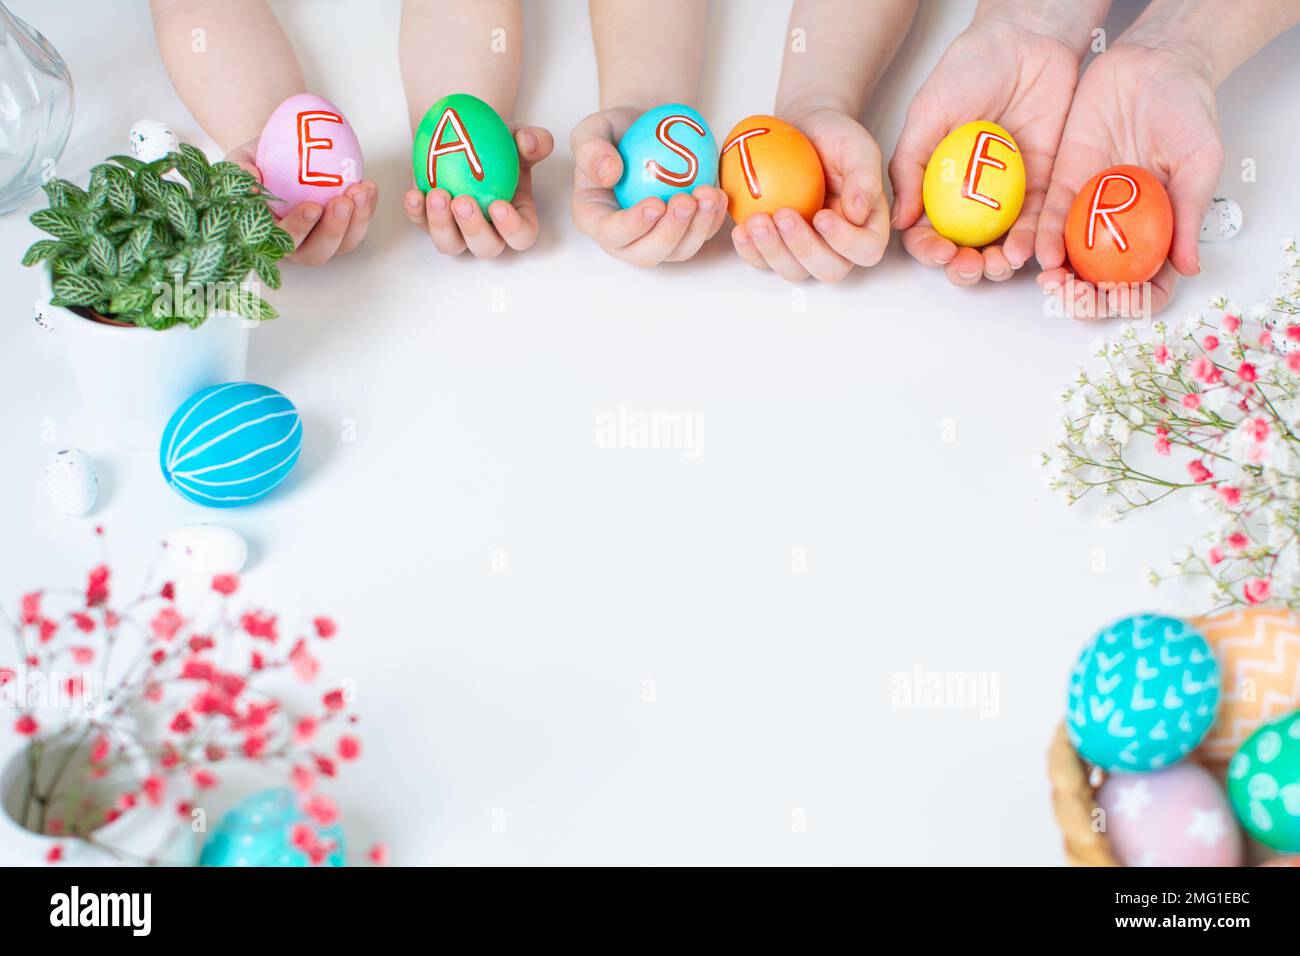 Colorful Easter eggs in hands with text. Holiday flat lay with copy space Stock Photo